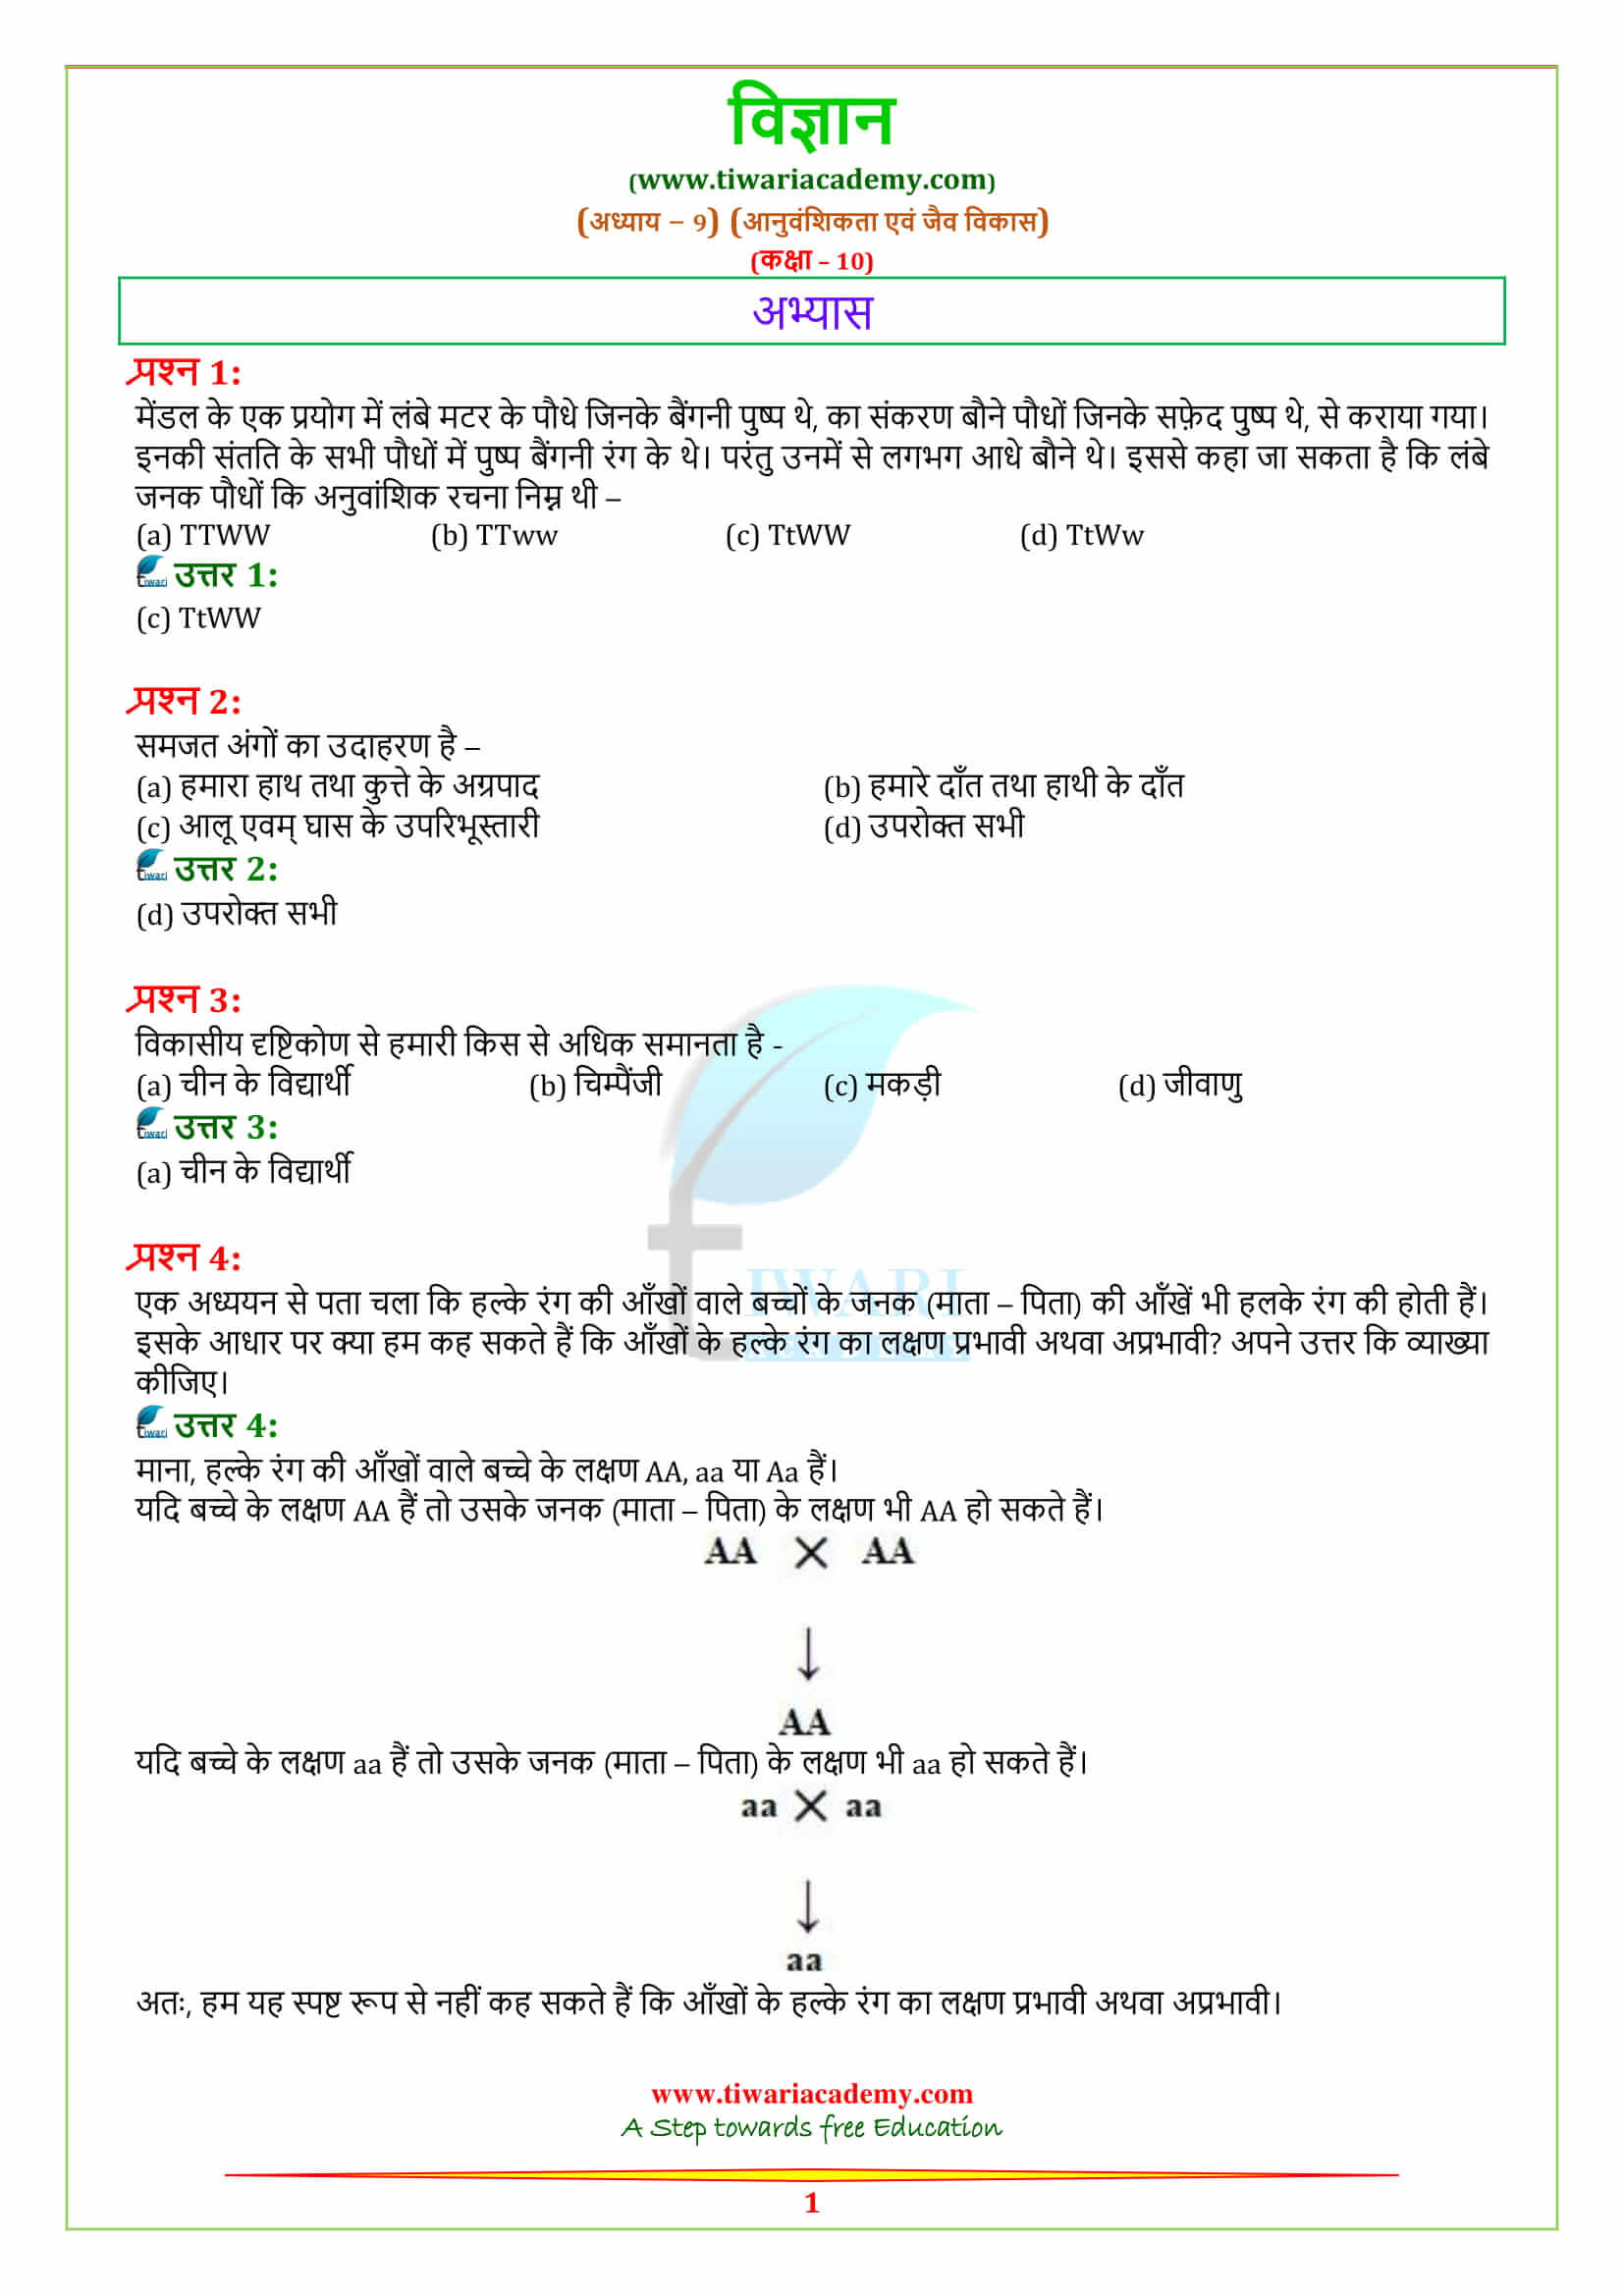 NCERT Solutions for Class 10 Science Chapter 9 Heredity and Evolution अभ्यास के प्रश्न उत्तर